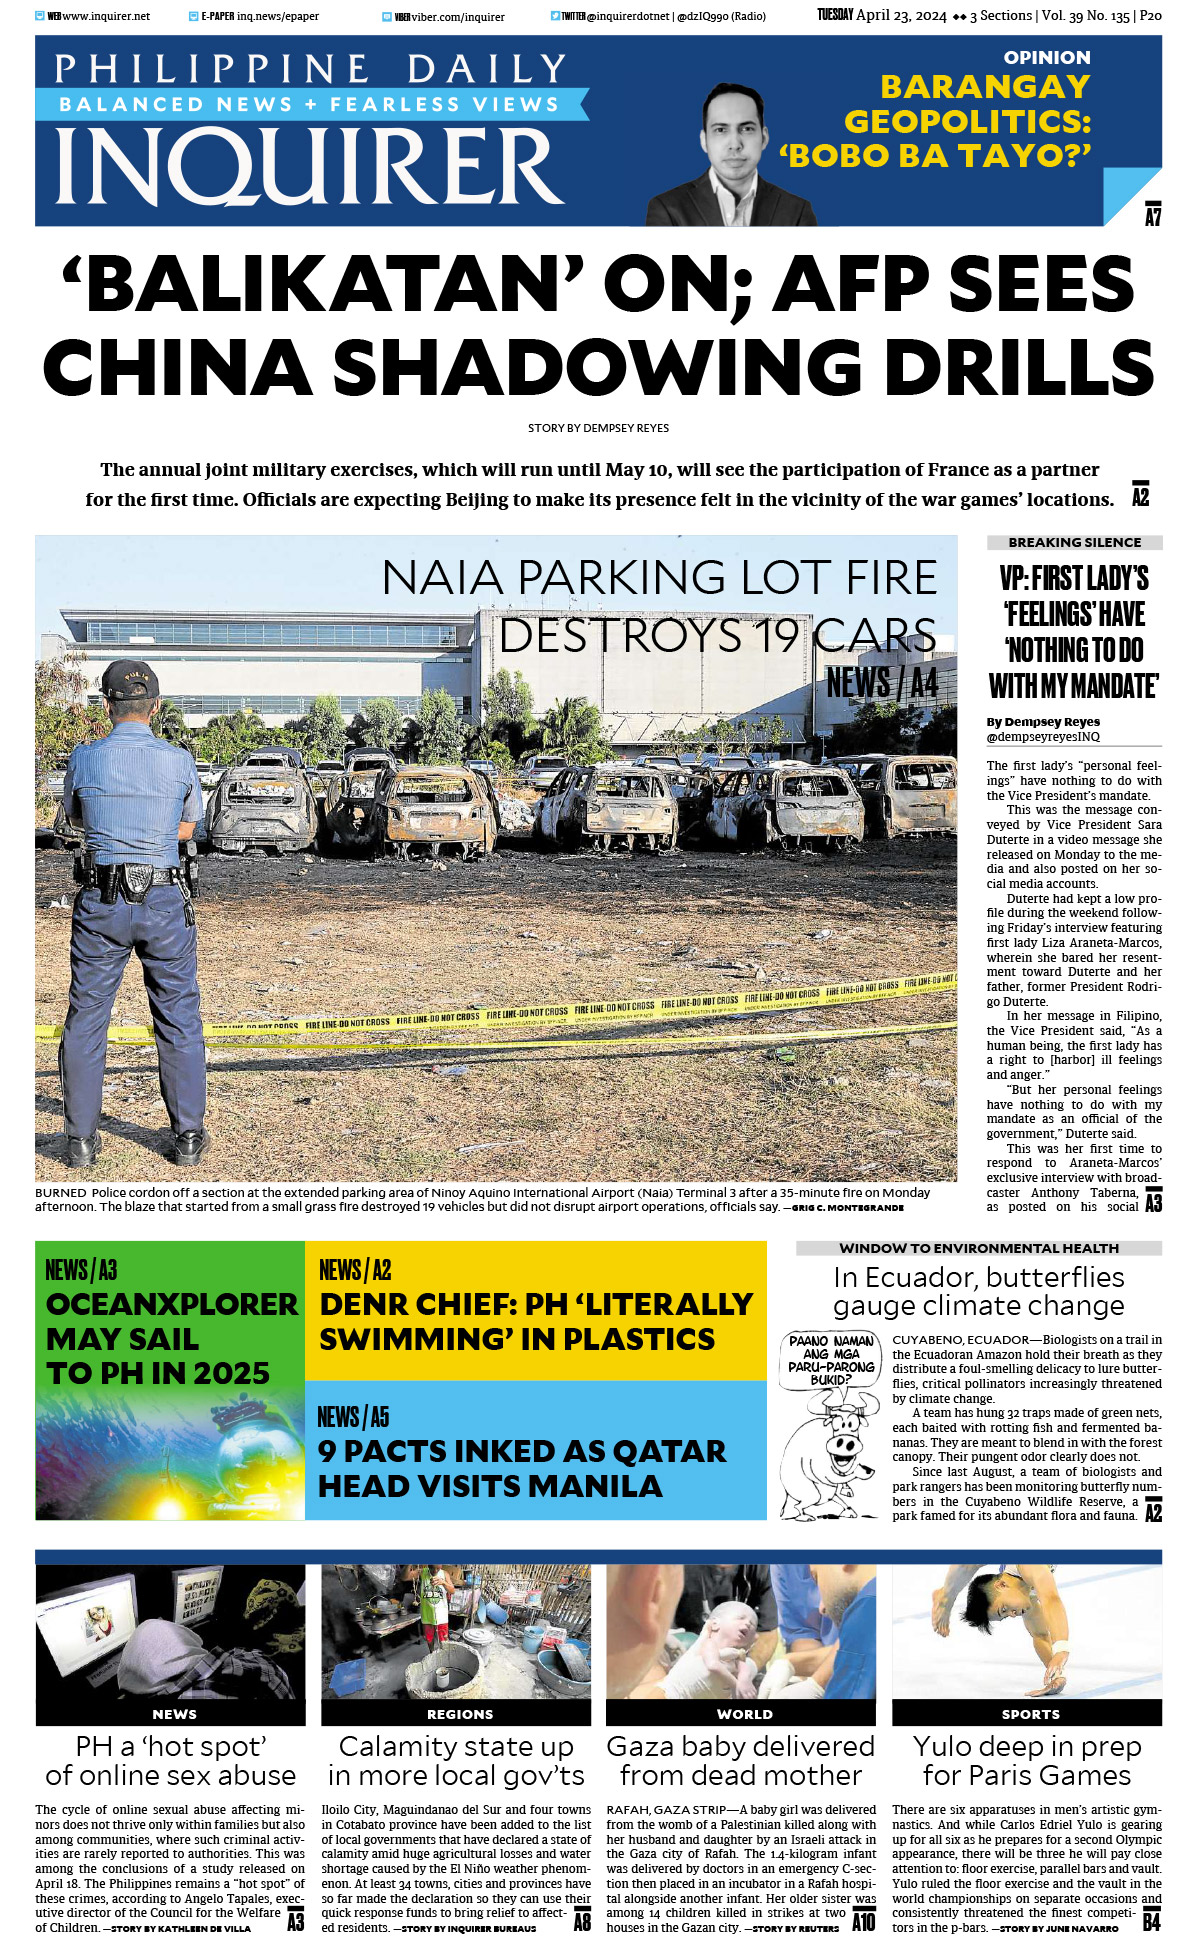 Today’s Paper: April 23, 2024